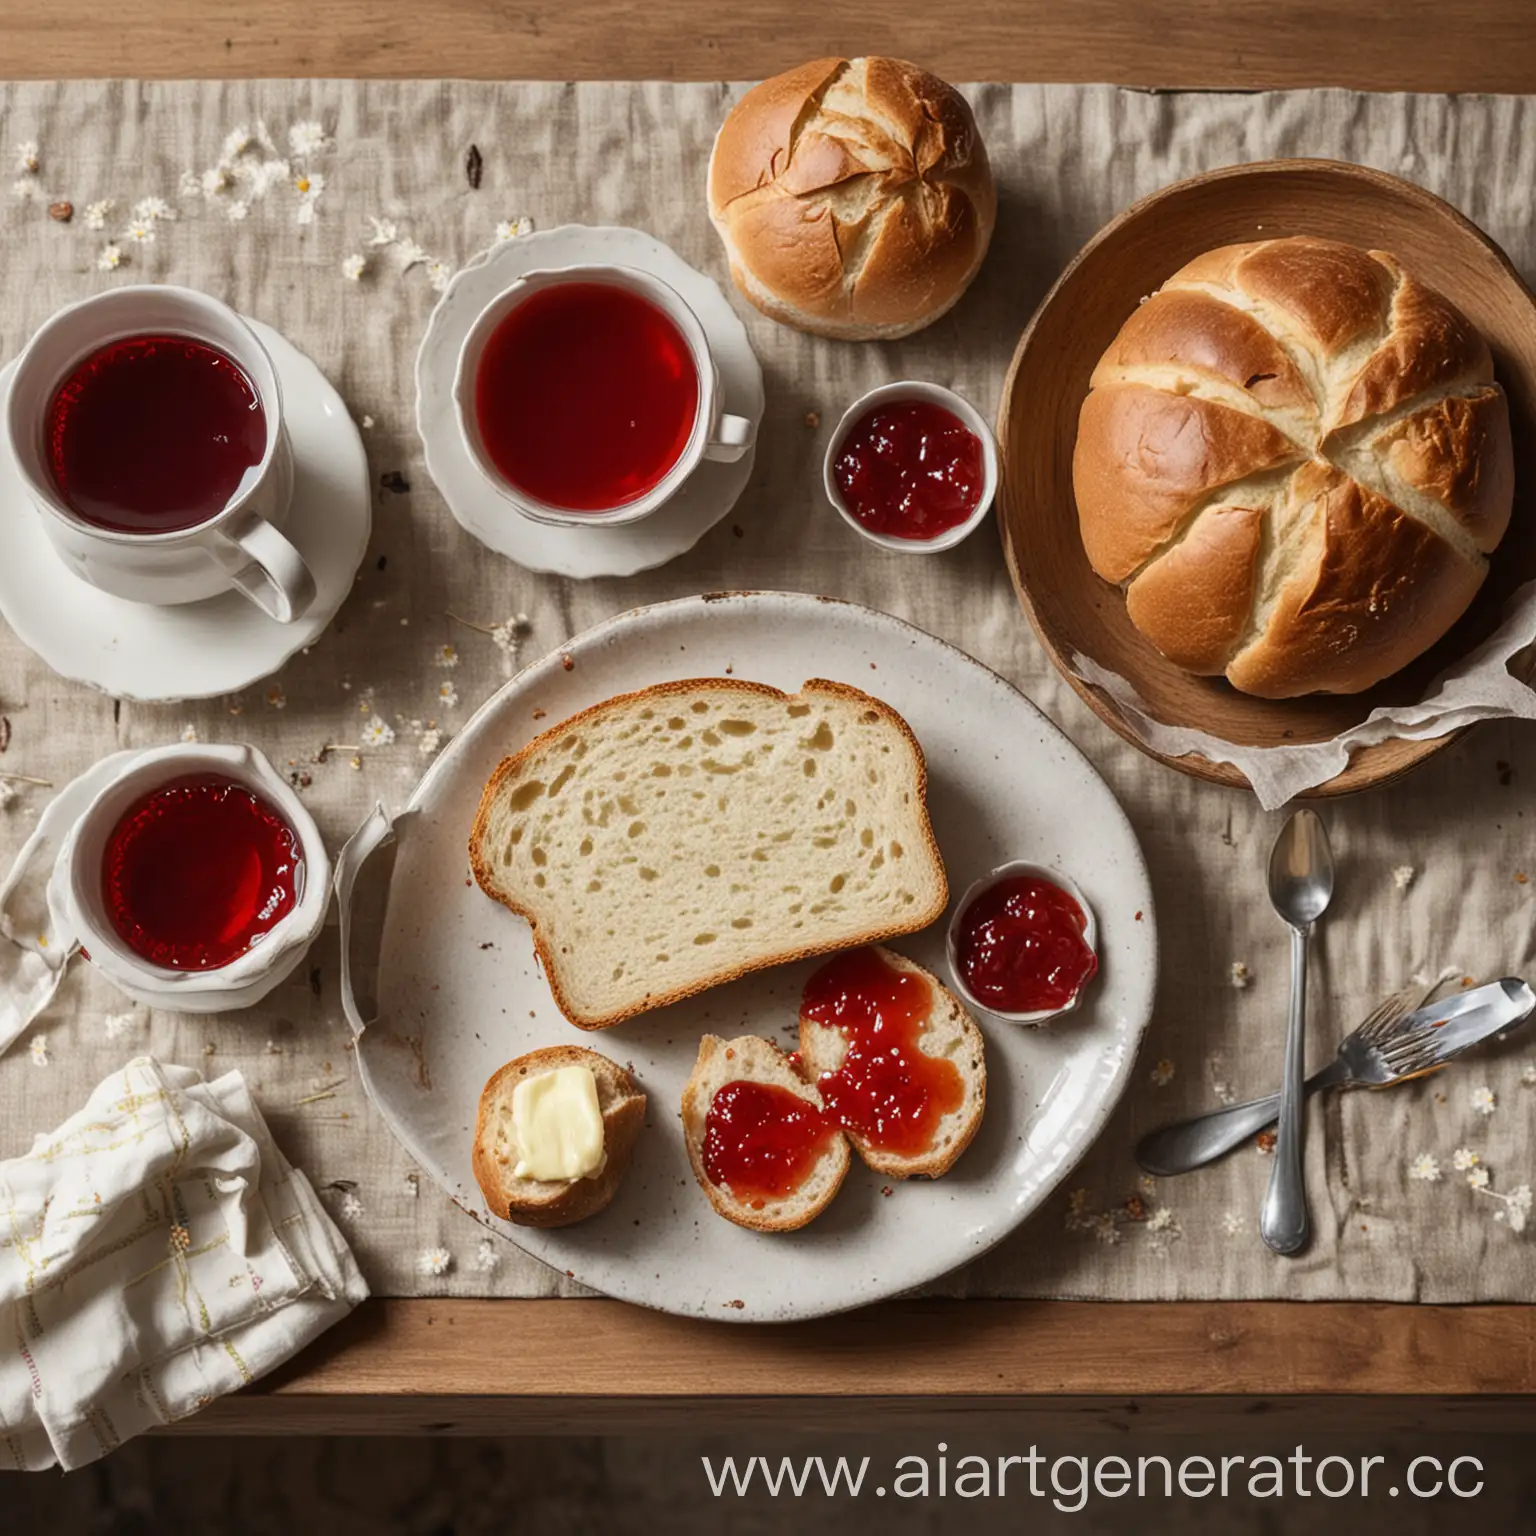 Table-Setting-with-Tea-Bread-Butter-and-Strawberry-Jam